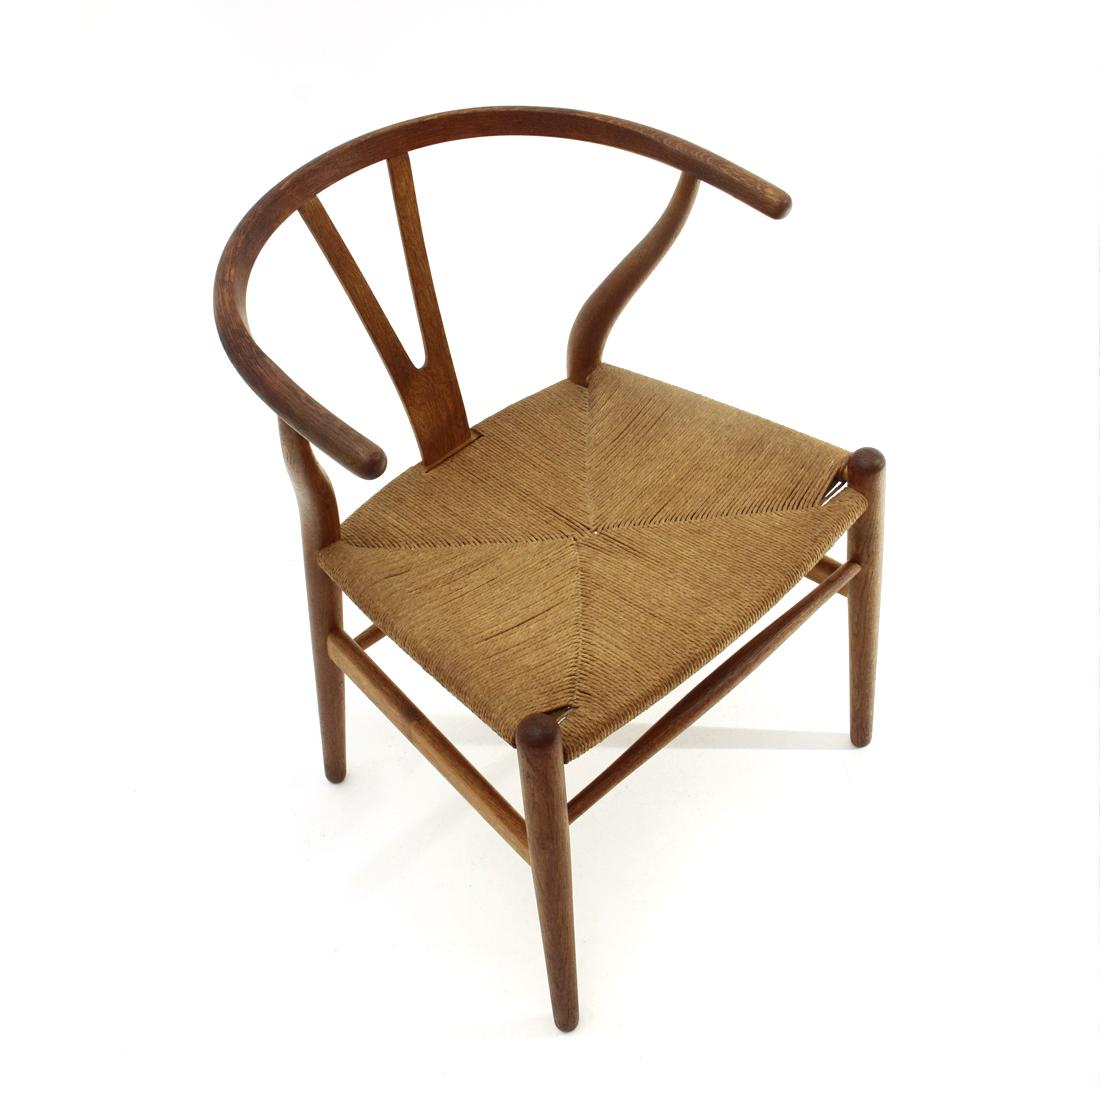 Chair produced by Carl Hansen & Søn on a project by Hans Wegner.
Oil finish oak structure.
Seat in natural woven straw.
Production around 2000.
Good general condition, some signs of normal use over time.

Dimensions: Length 53 cm, depth 50 cm,